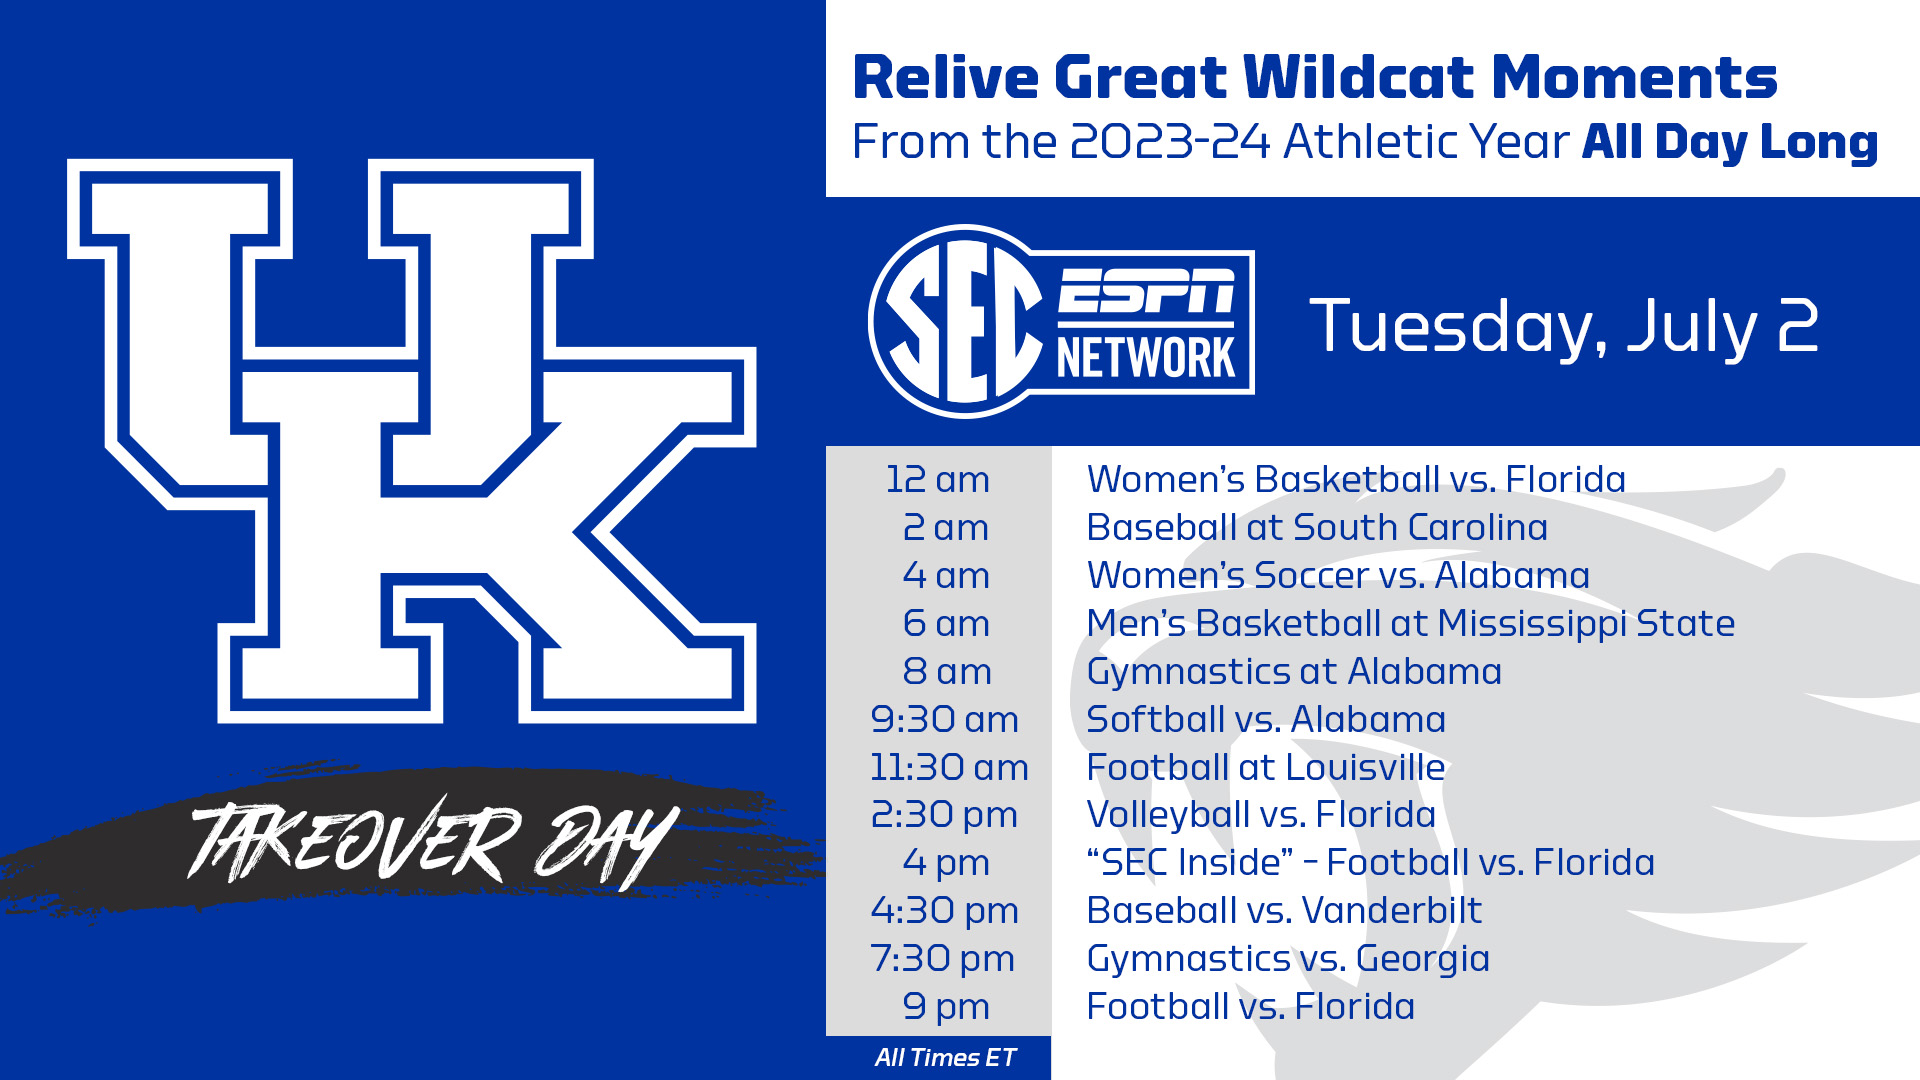 Kentucky Featured on SEC Network “Takeover Day” Tuesday